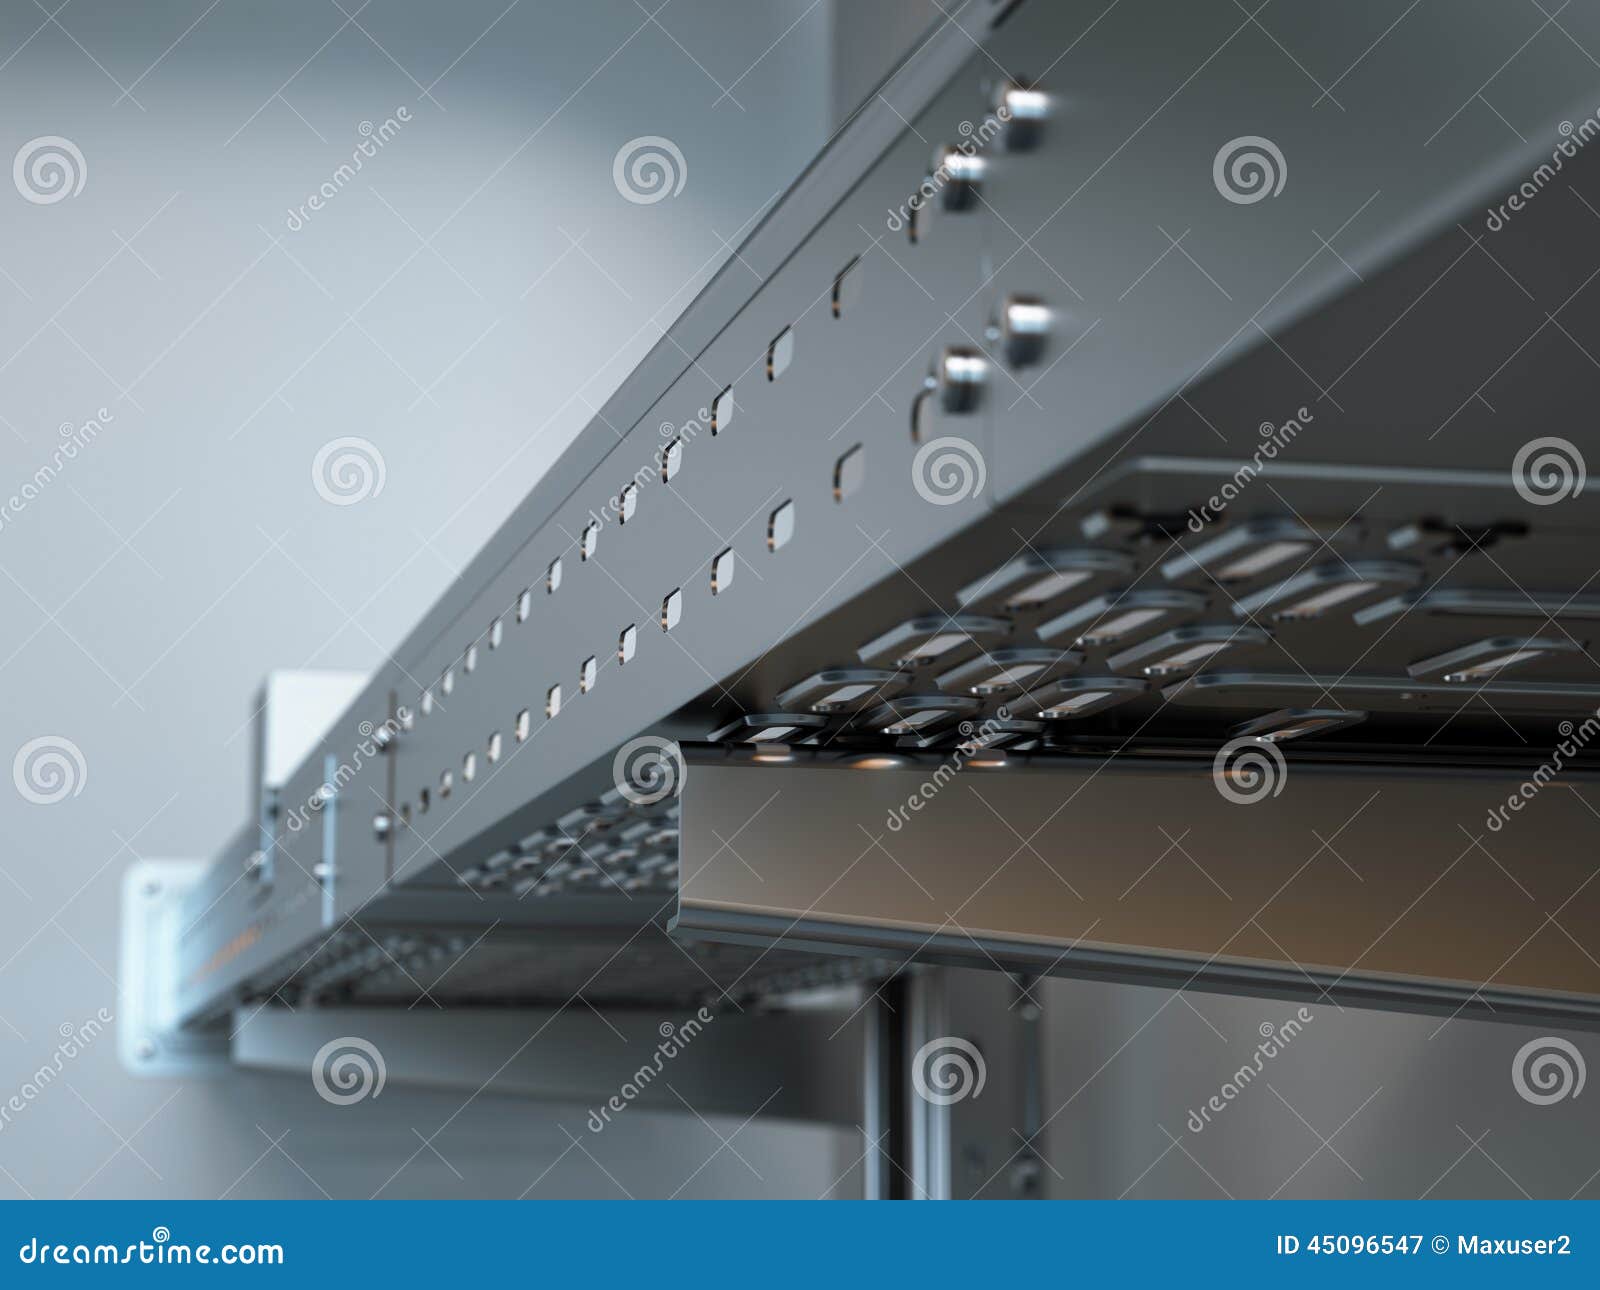 metal cable tray